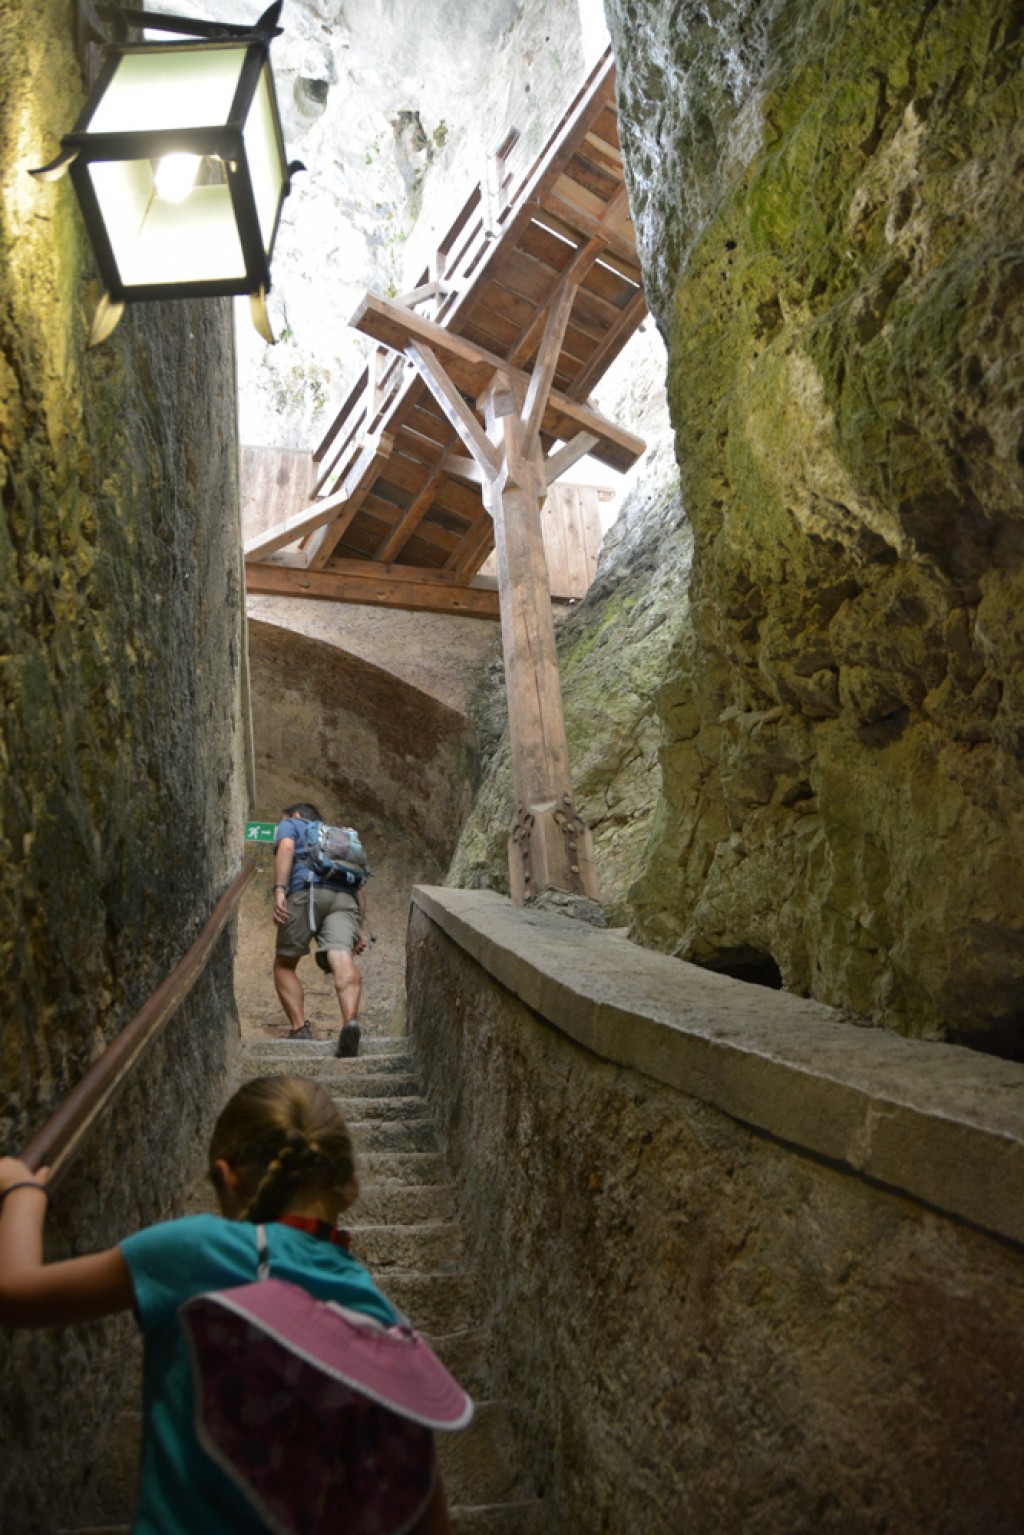 Predjama Castle is a castle built into a cave. It is an awesome place to explore with kids, lots of rooms to explore, all built in to a cave that can be explored. 